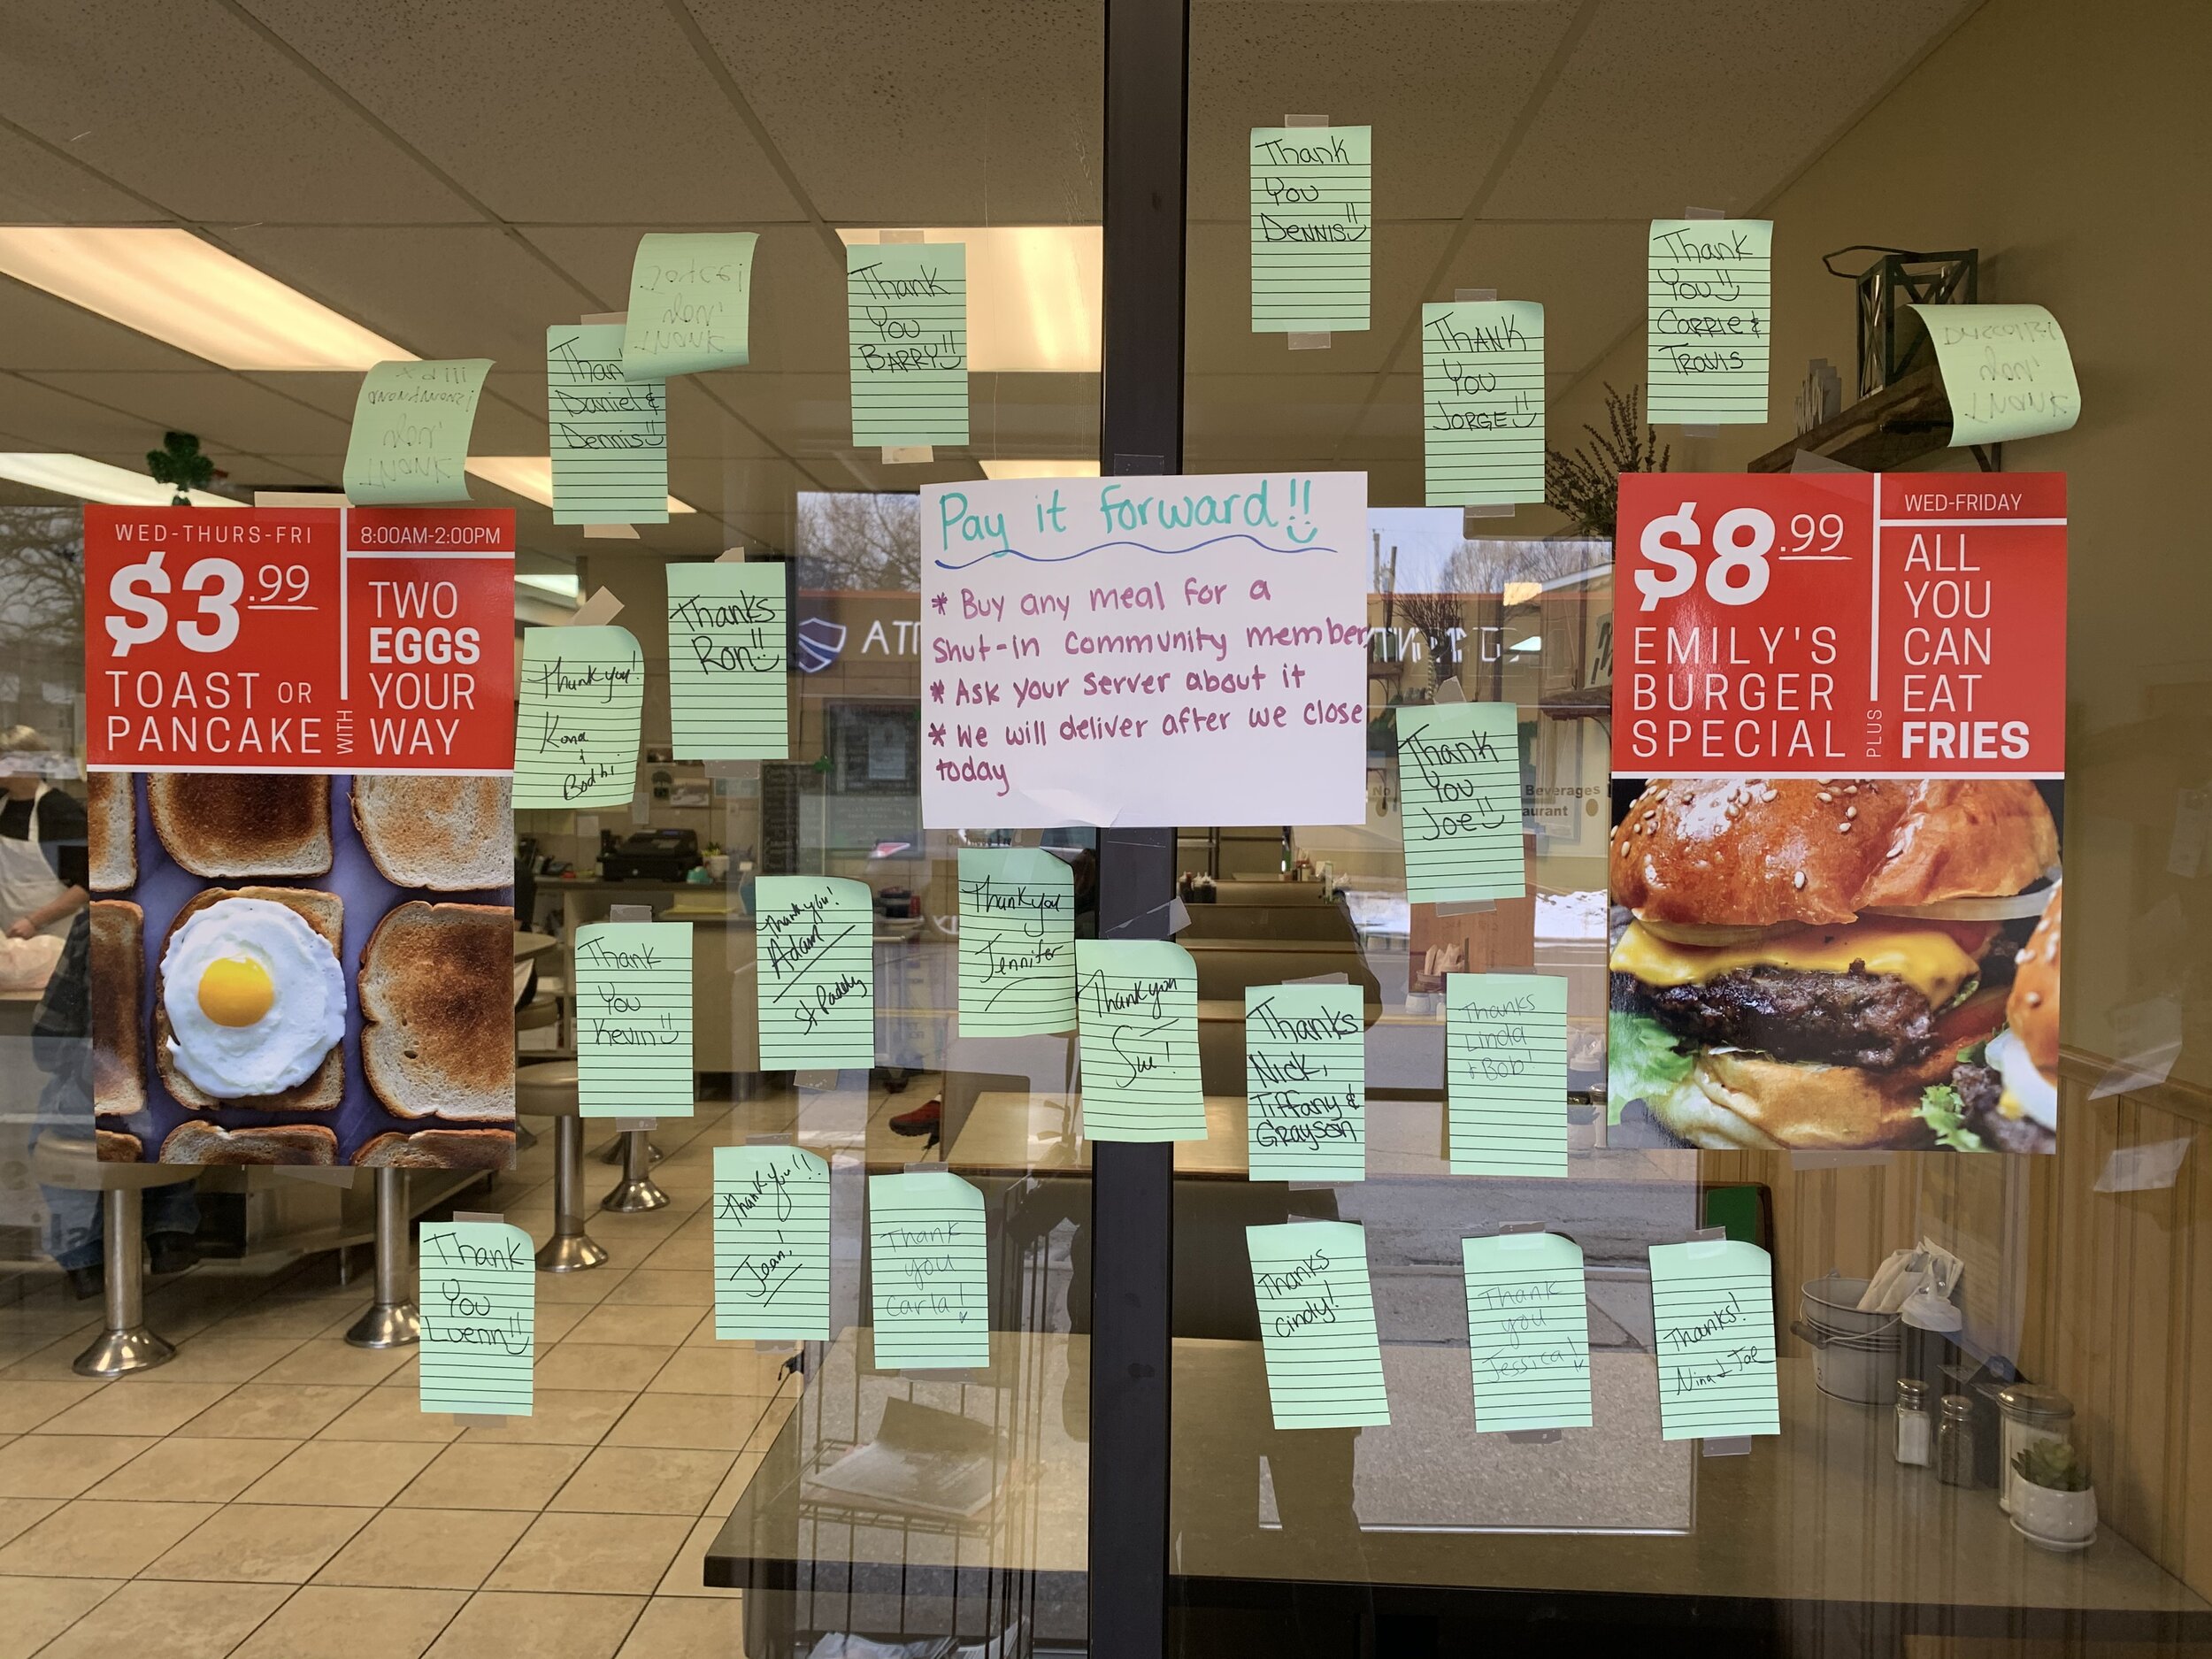  Over the weekend of March 14, Emily’s F&amp;M Cafe patrons started purchasing extra meals for those in need during the COVID-19 pandemic. The cafe’s thank you notes to the donors now decorate the entrance to the cafe.&nbsp; Photo by Kenzie O’Keefe  